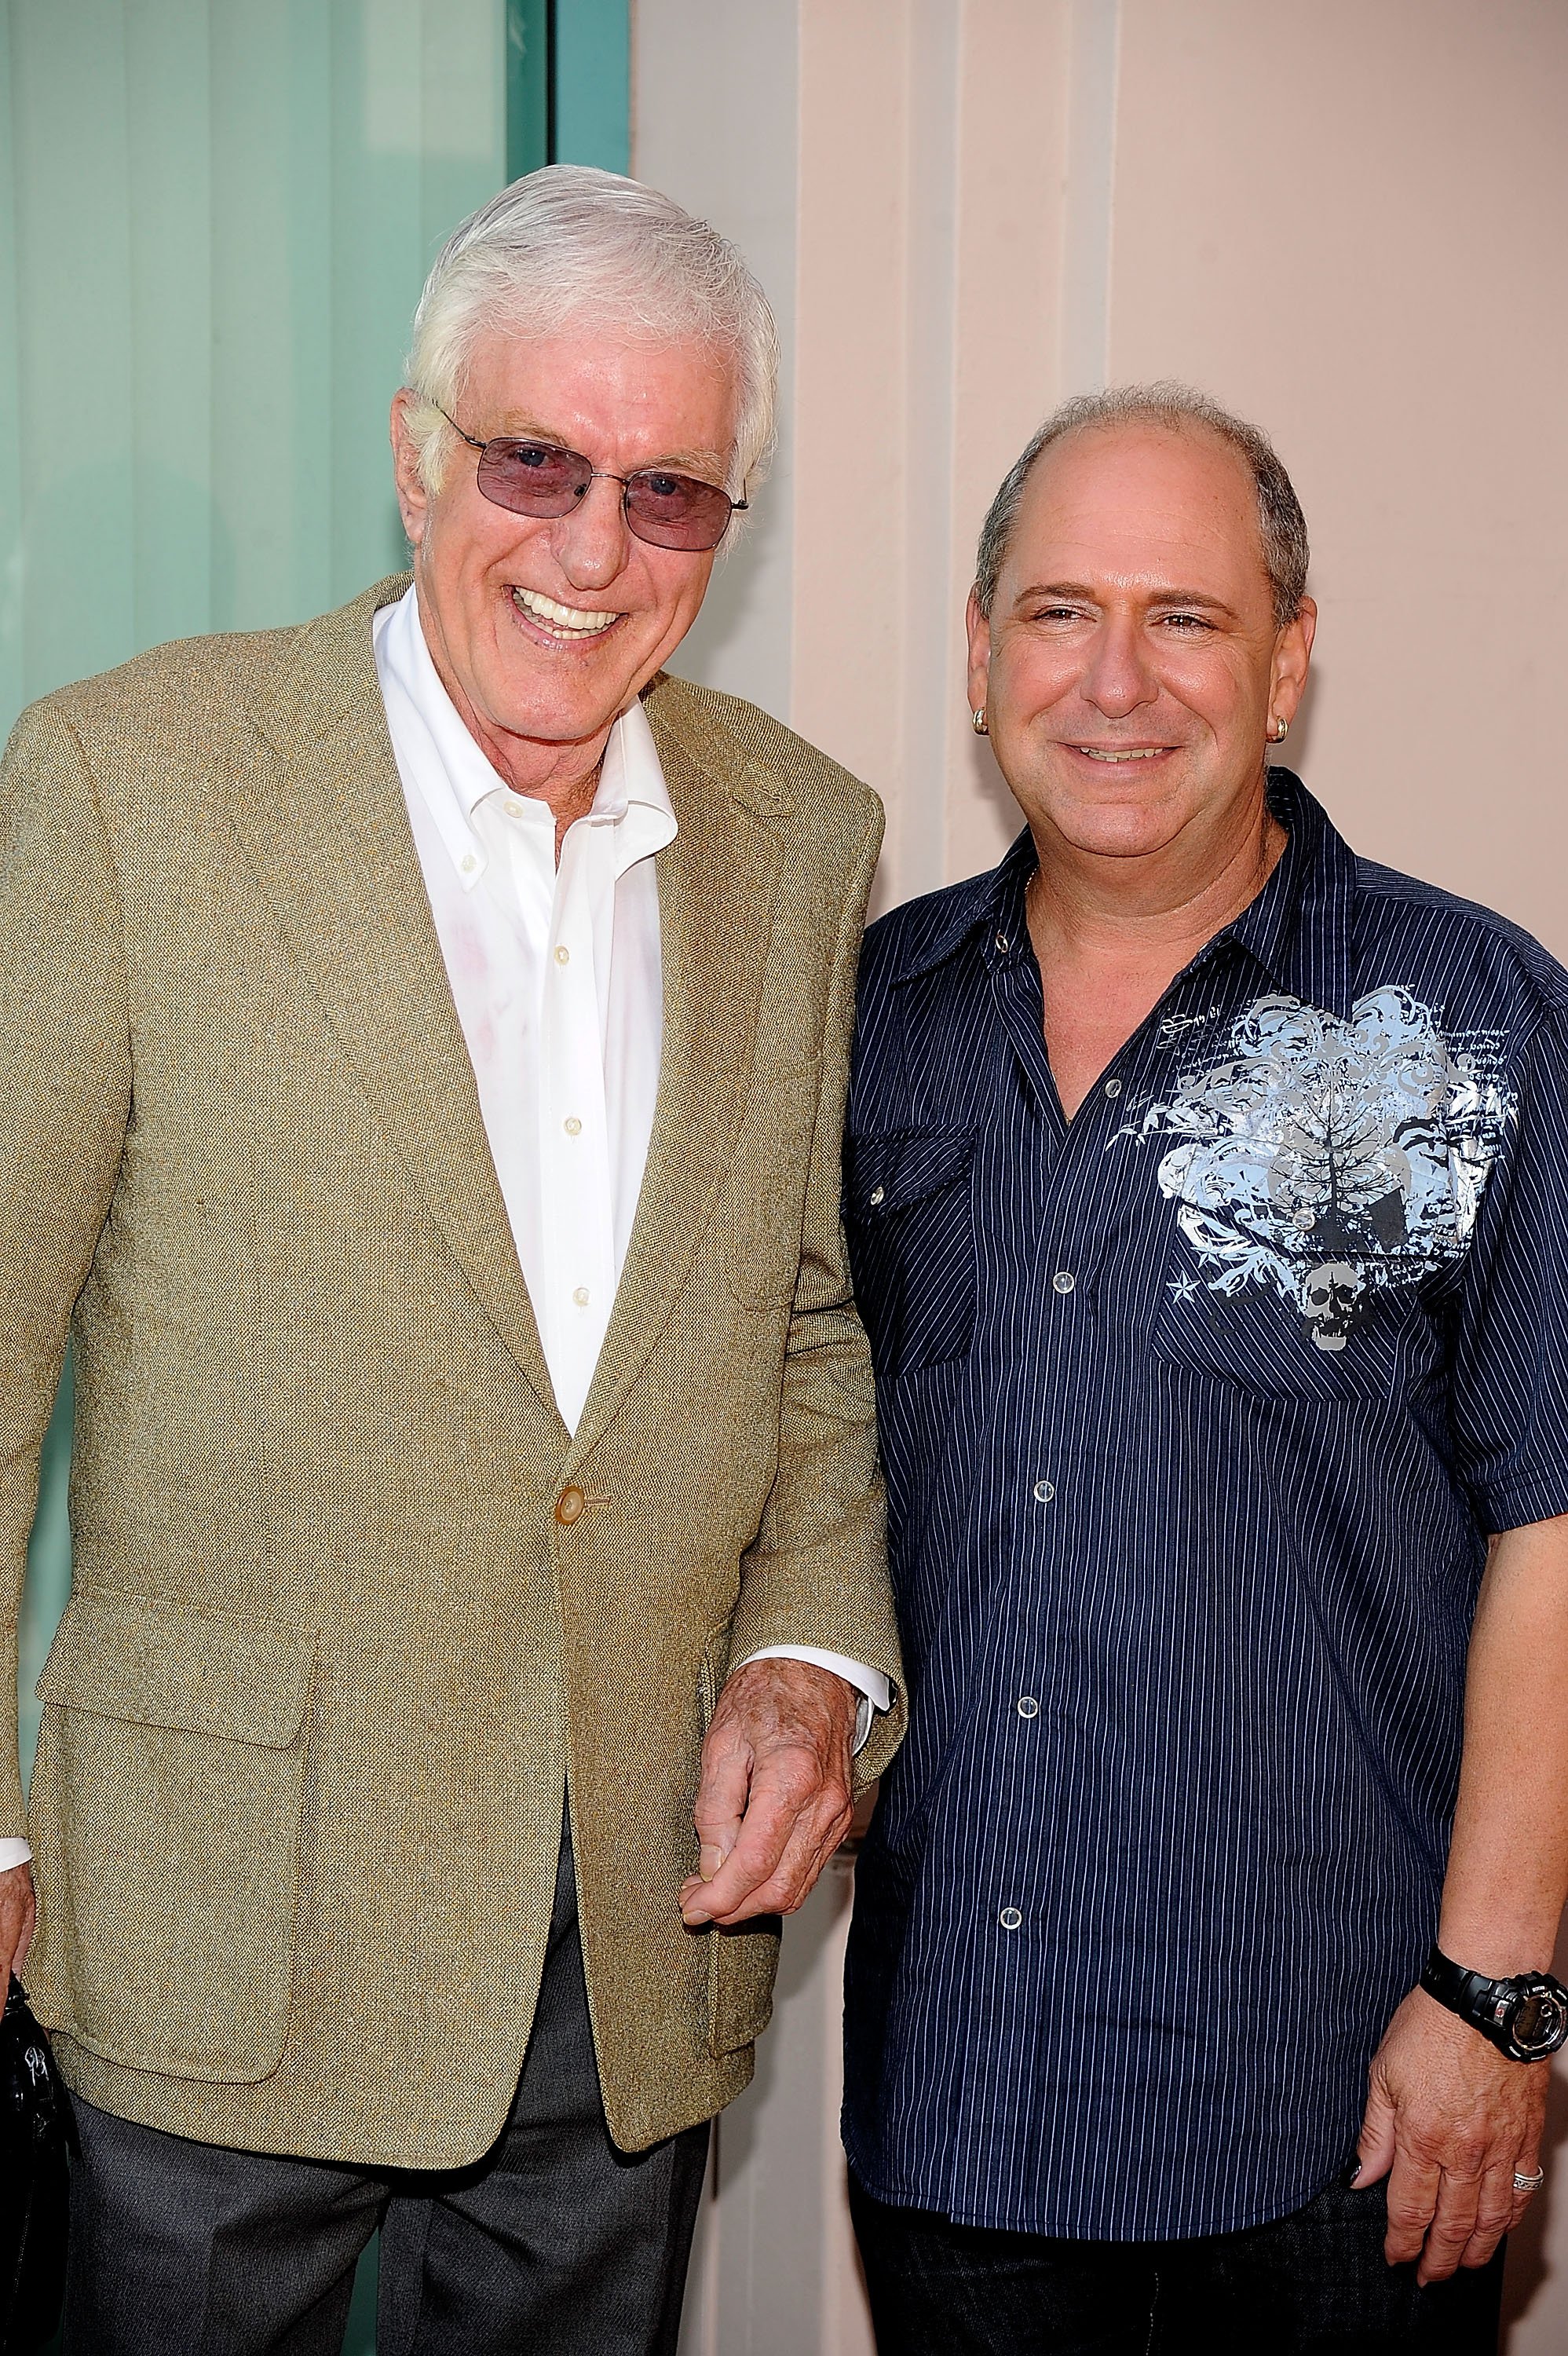 Dick Van Dyke and Larry Mathews at the Academy Of Television Arts & Sciences' "Father's Day Salute To TV Dads" on June 18, 2009, in California | Photo: Getty Images